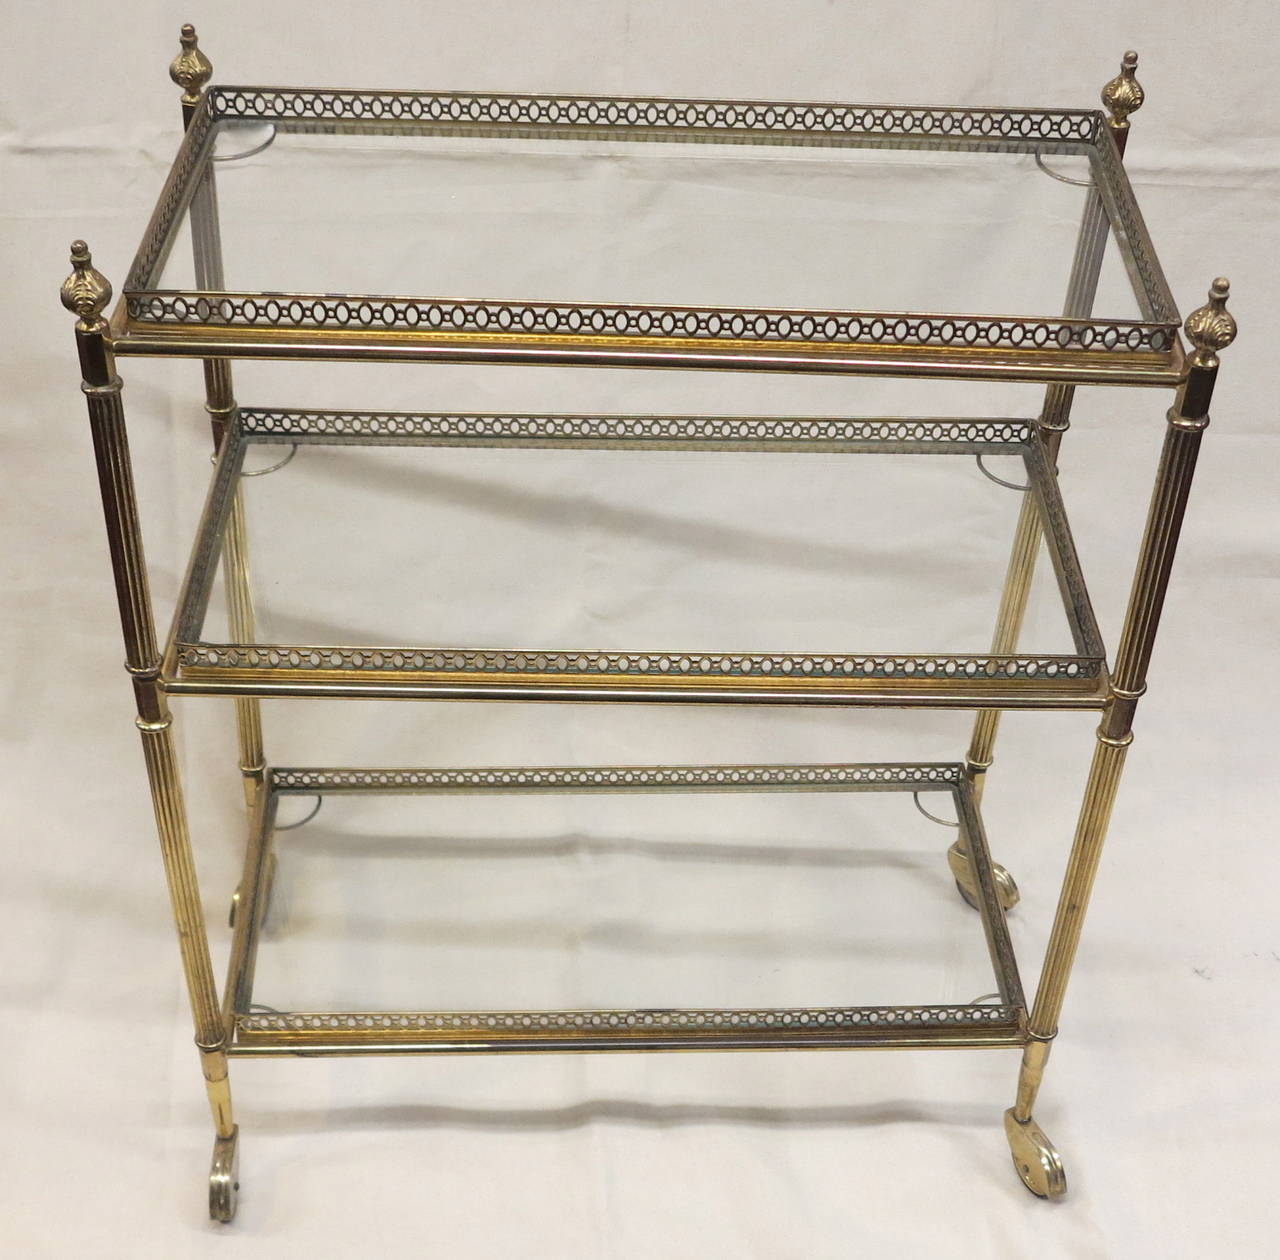 Service has wheels with amounts in bronze with pine cones, 3 removable glass shelves with gallery , good condition, circa 1950-1970